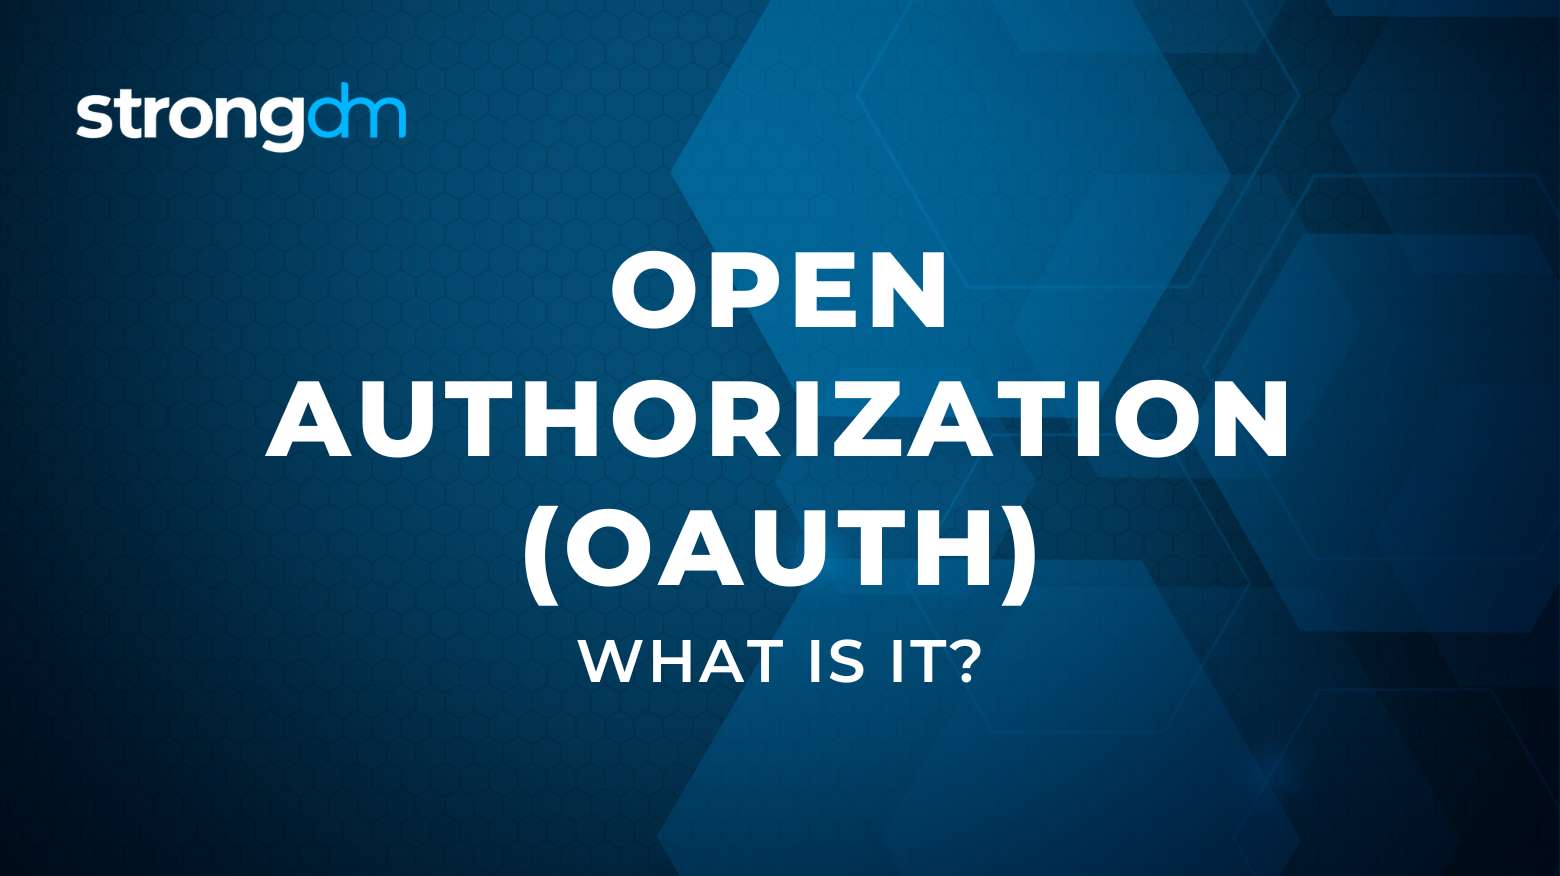 What is Open Authorization (OAuth)? Definition